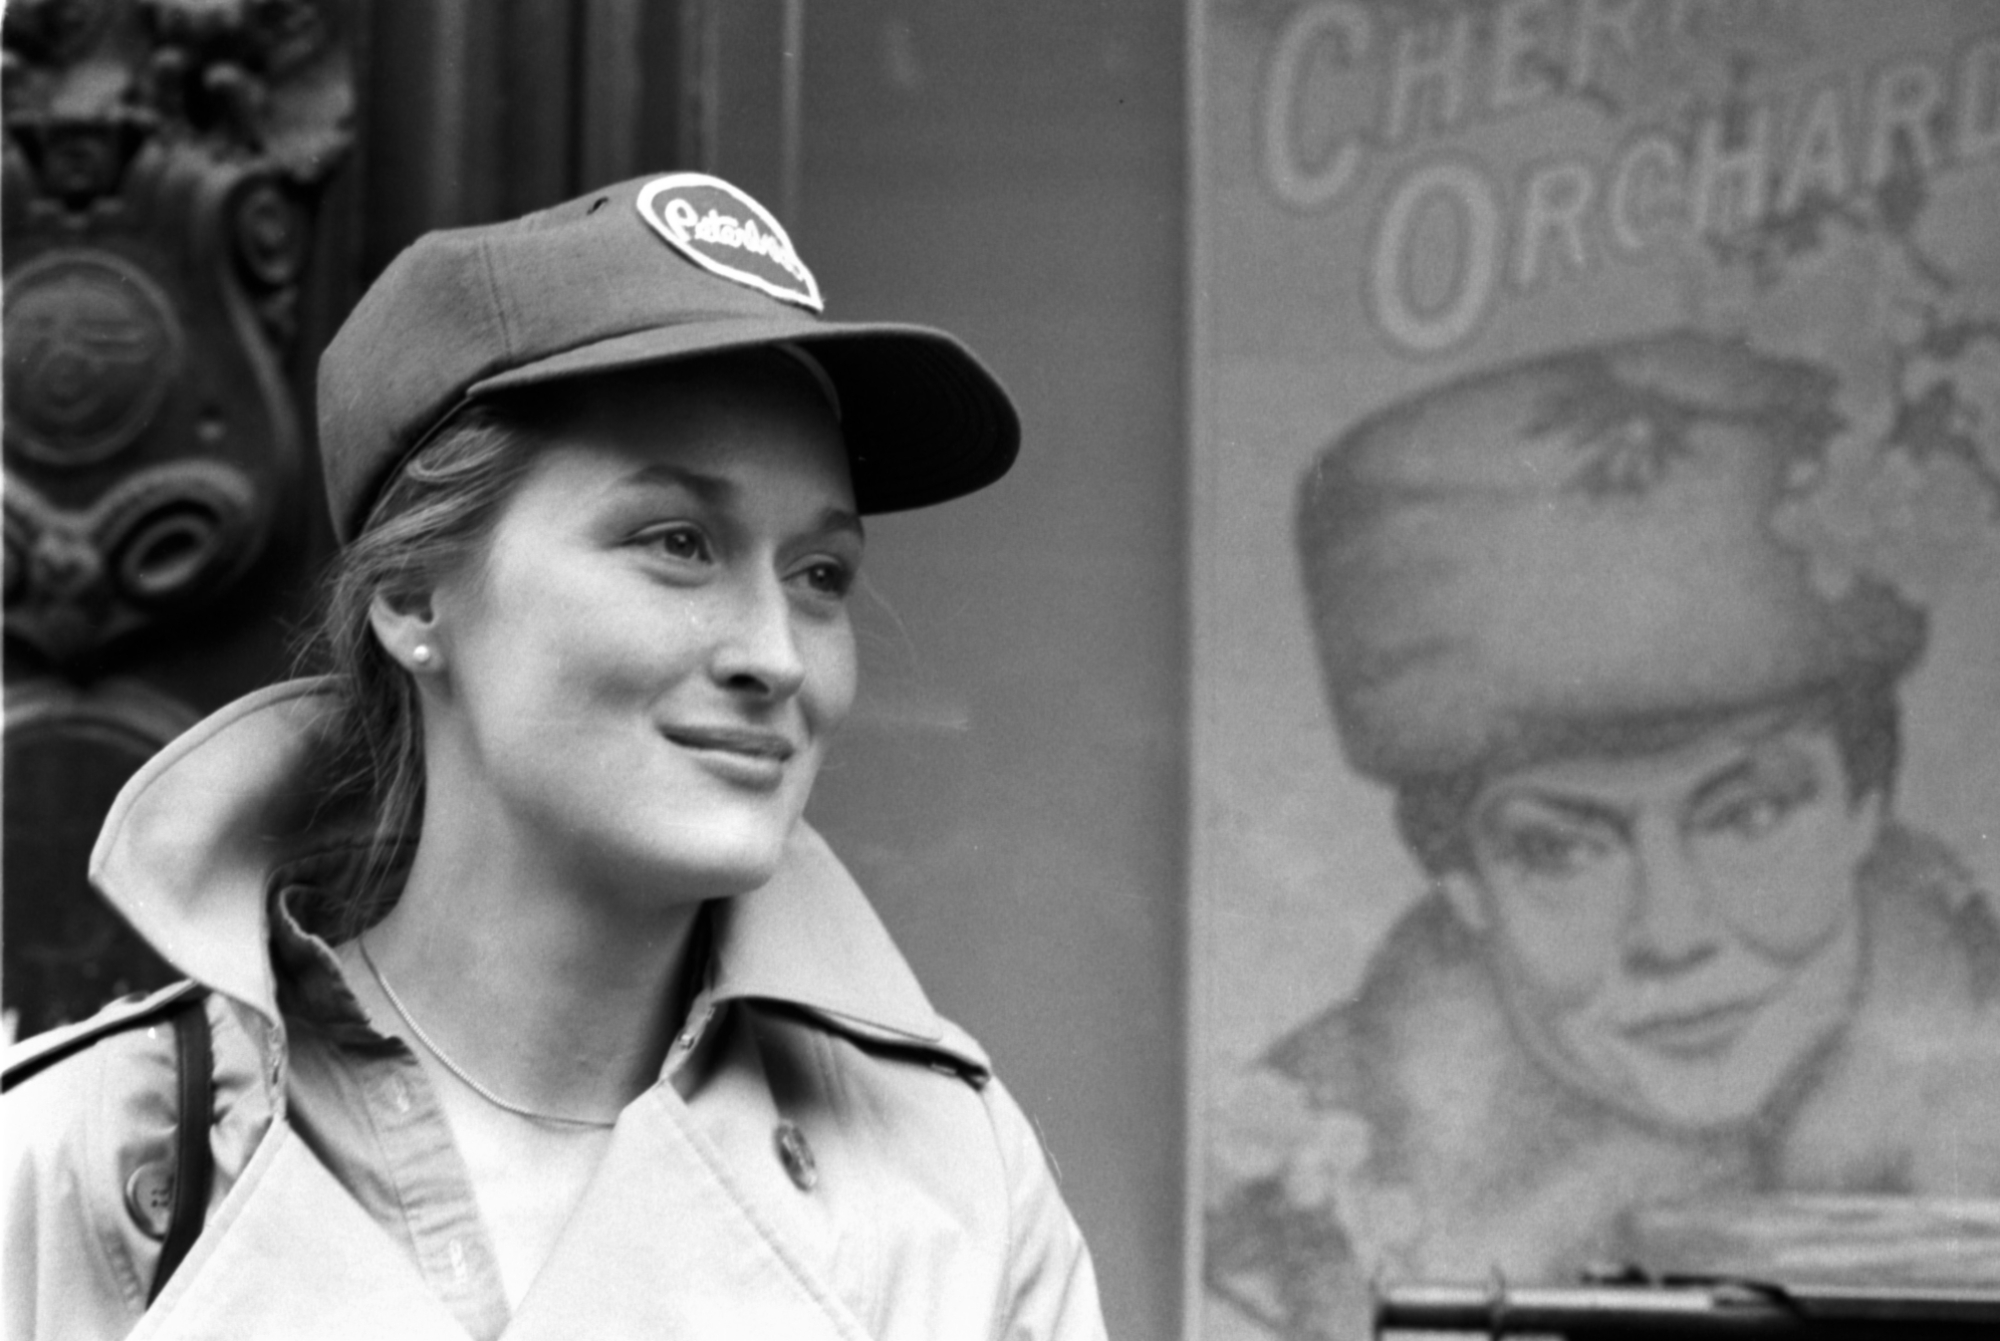 Emmy Award winner Meryl Streep wearing a baseball cap and a coat with a smile on her face